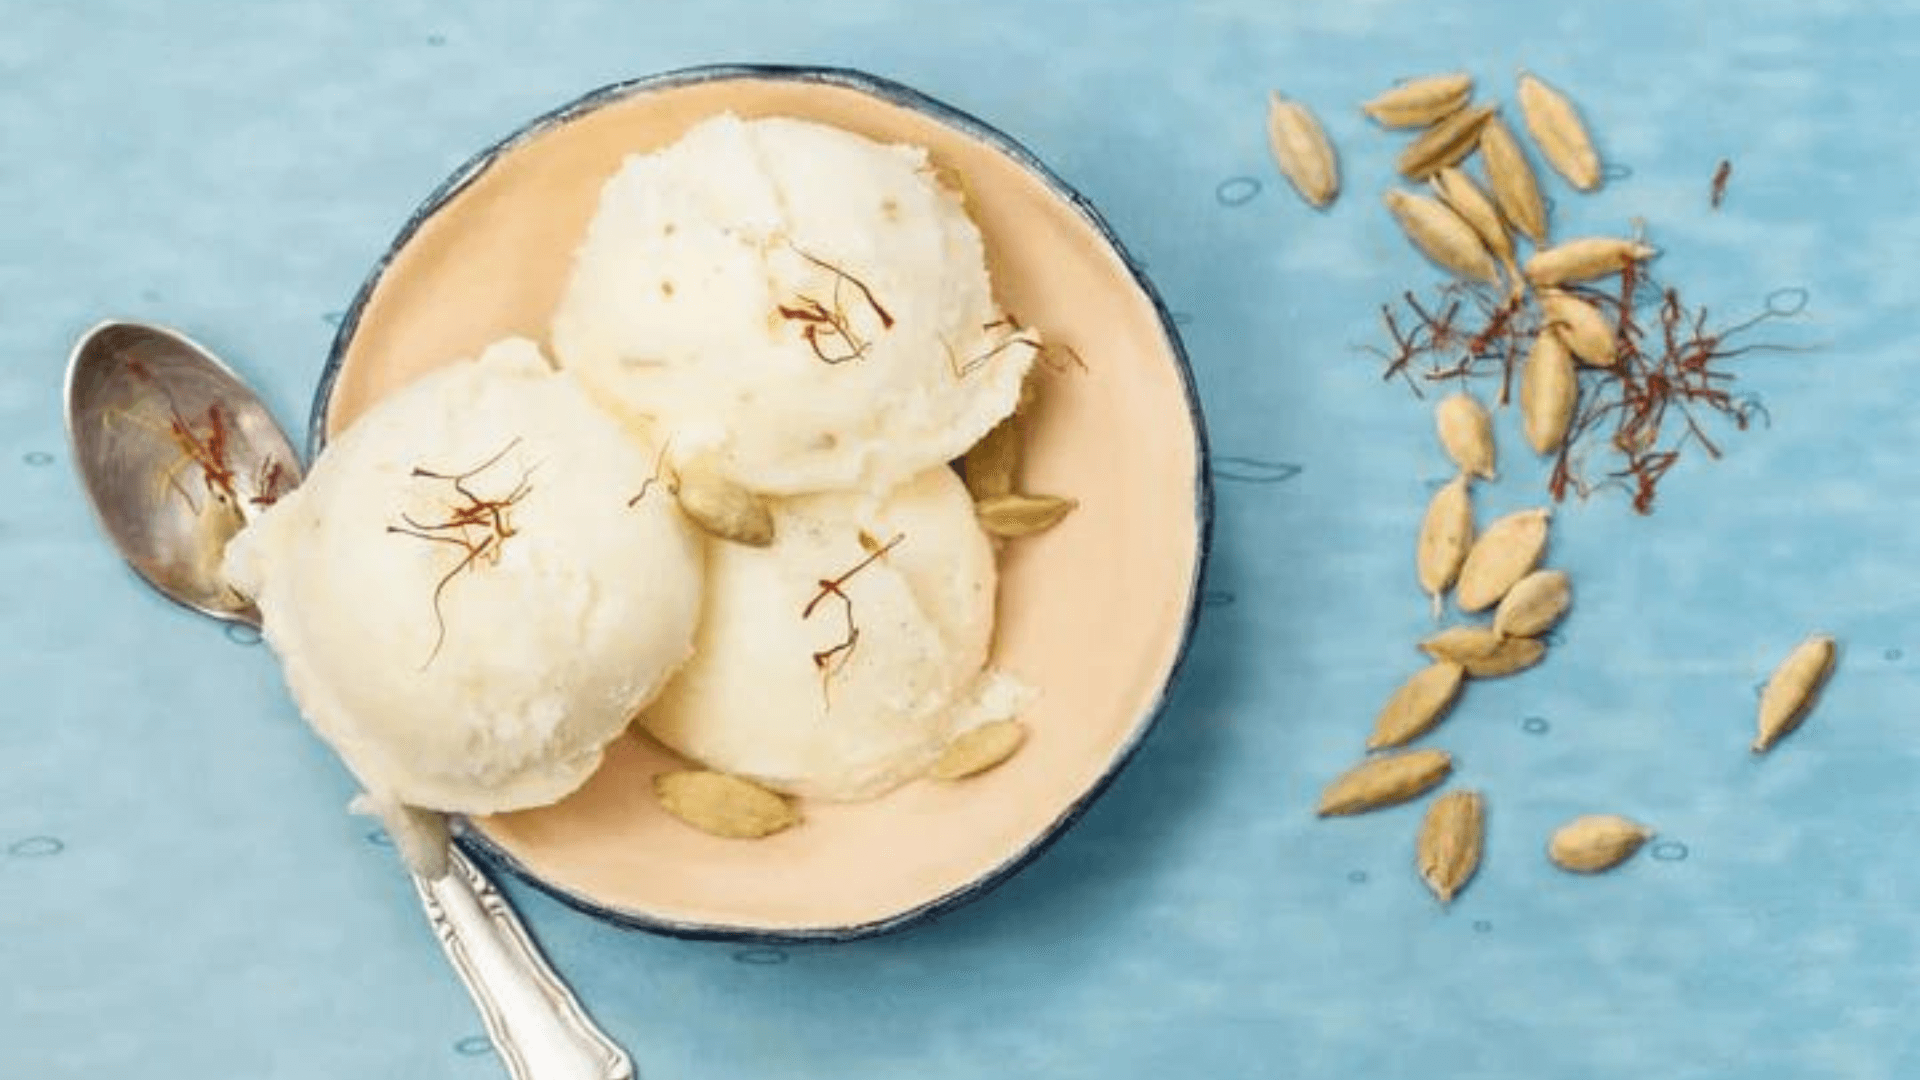 Delicious Cardamom-infused Dessert Recipes to Satisfy Your Sweet Tooth